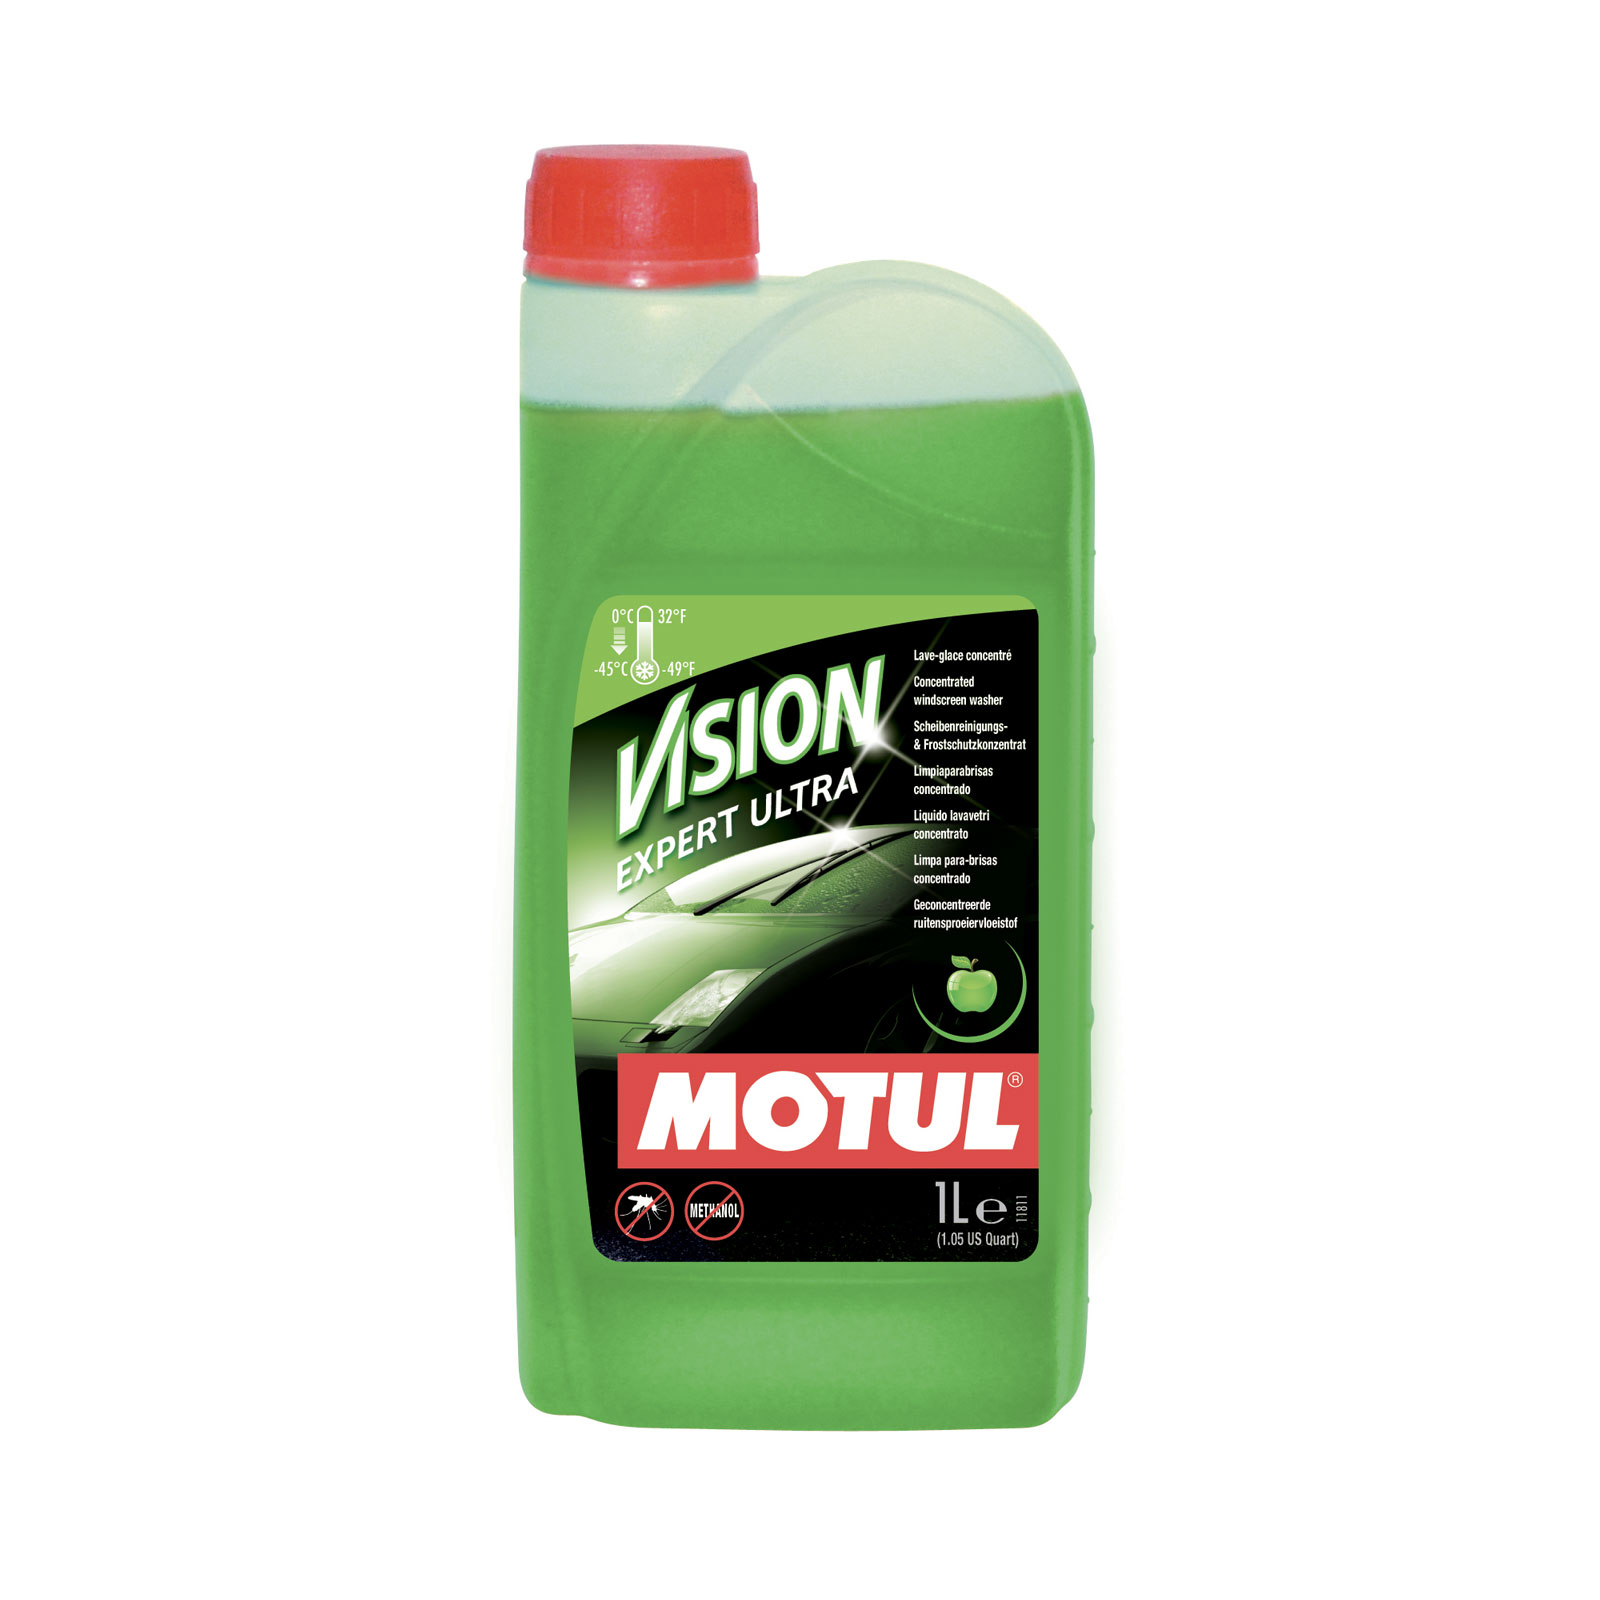 Motul Vision Expert Ultra Concentrated Windshield Cleaner (1L)